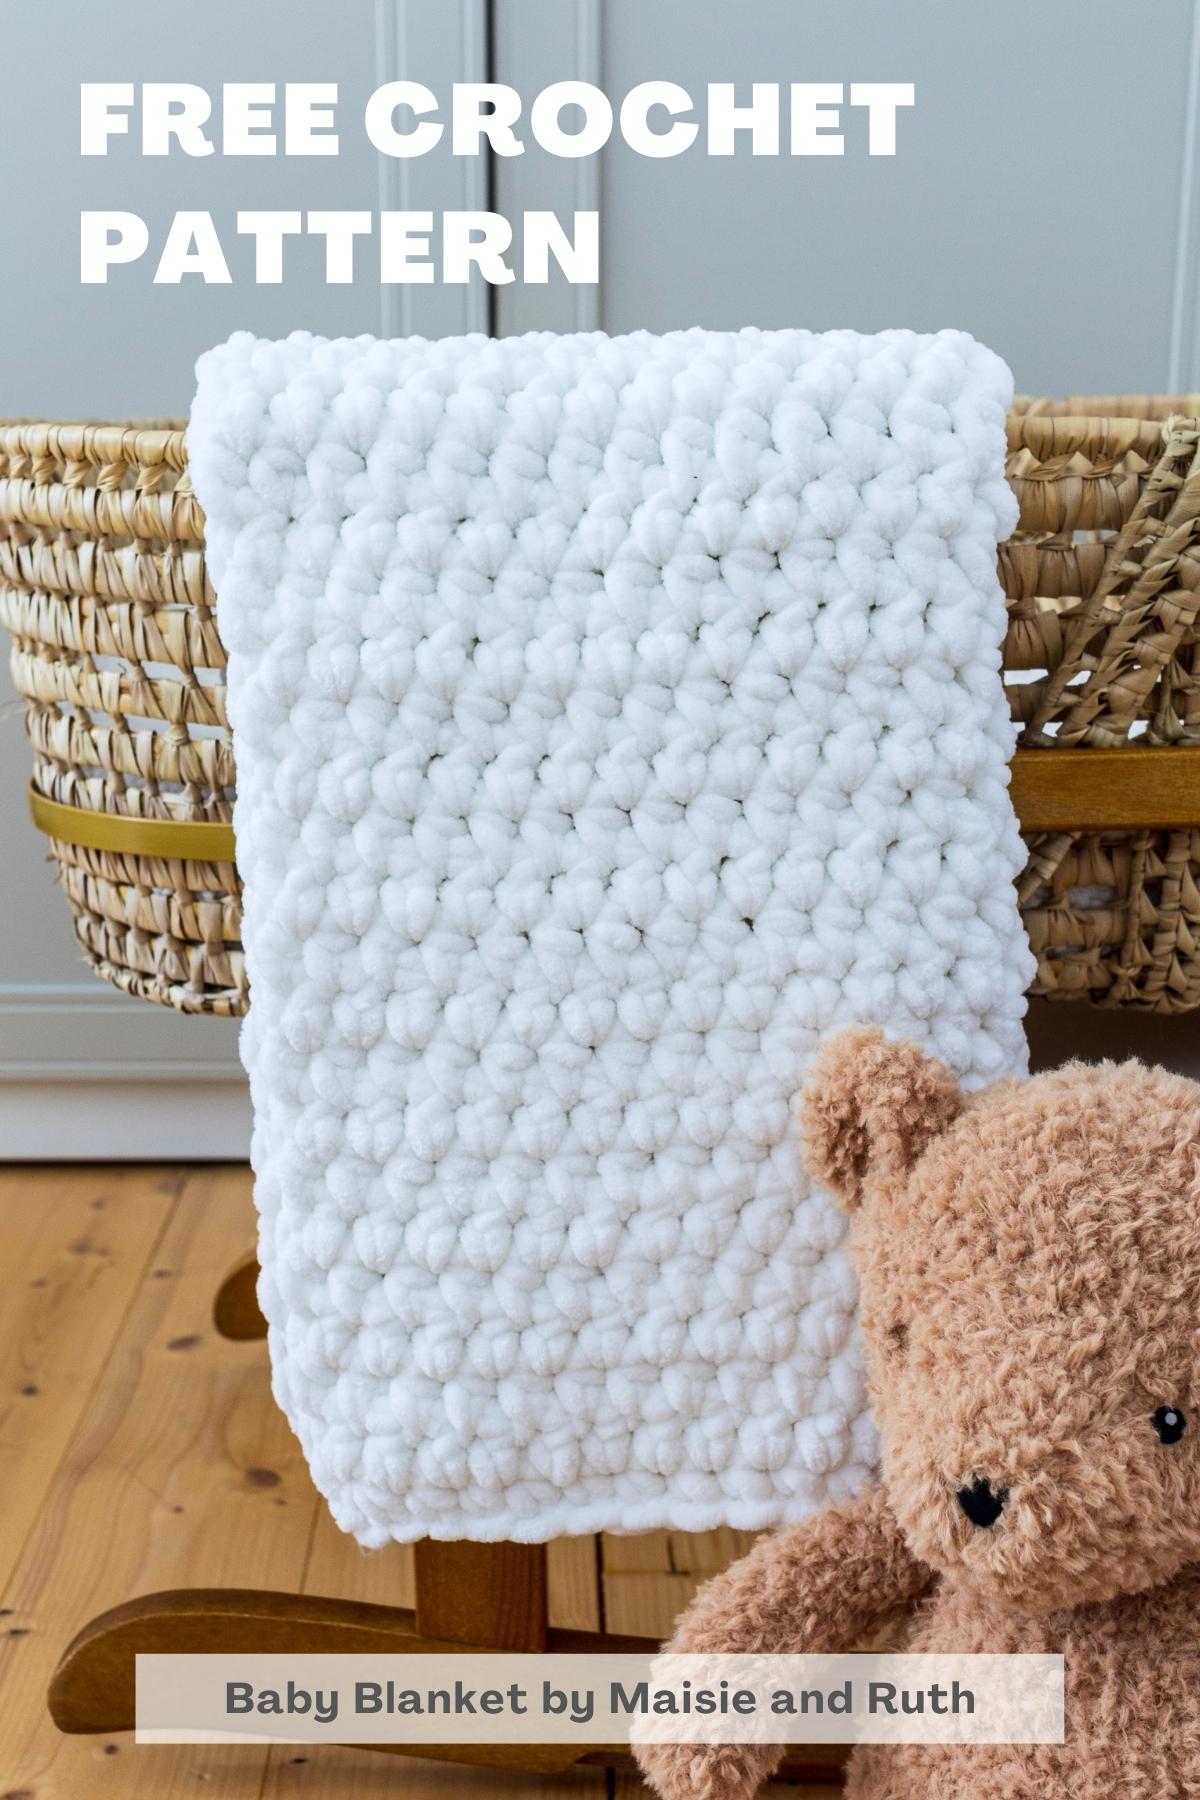 Baby Blanket with teddy